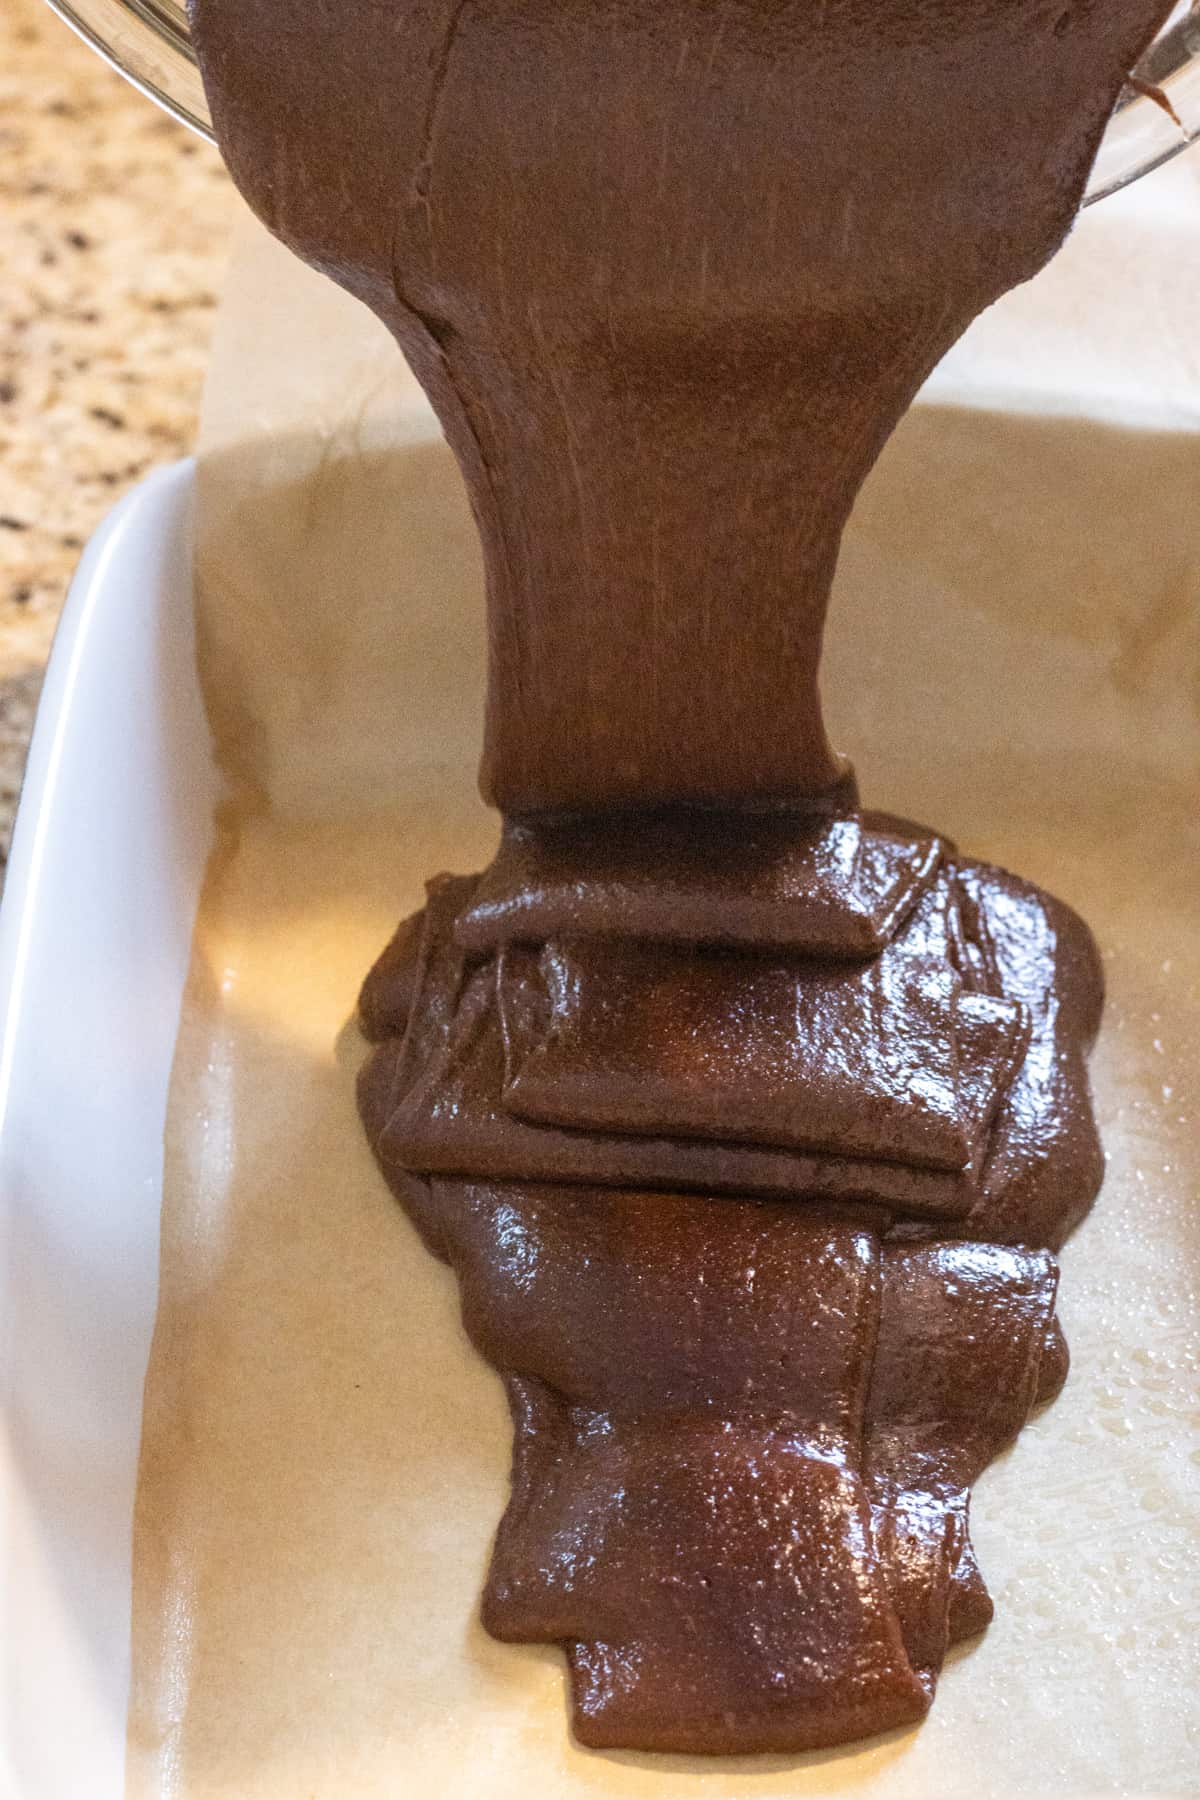 Brownie batter being poured into a parchment lined baking dish.